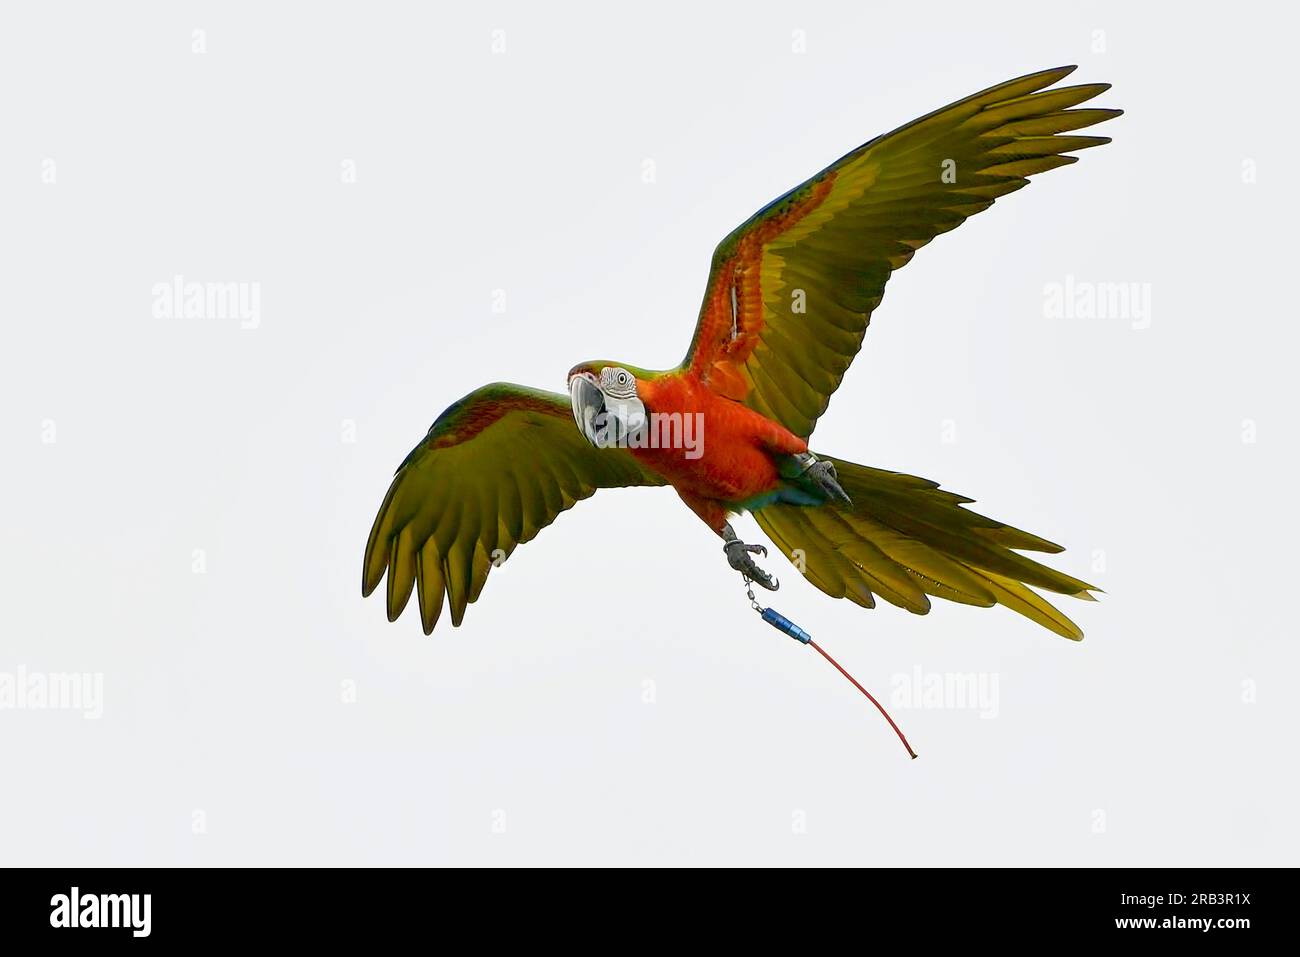 Macaw parrots fly freely in the sky Stock Photo